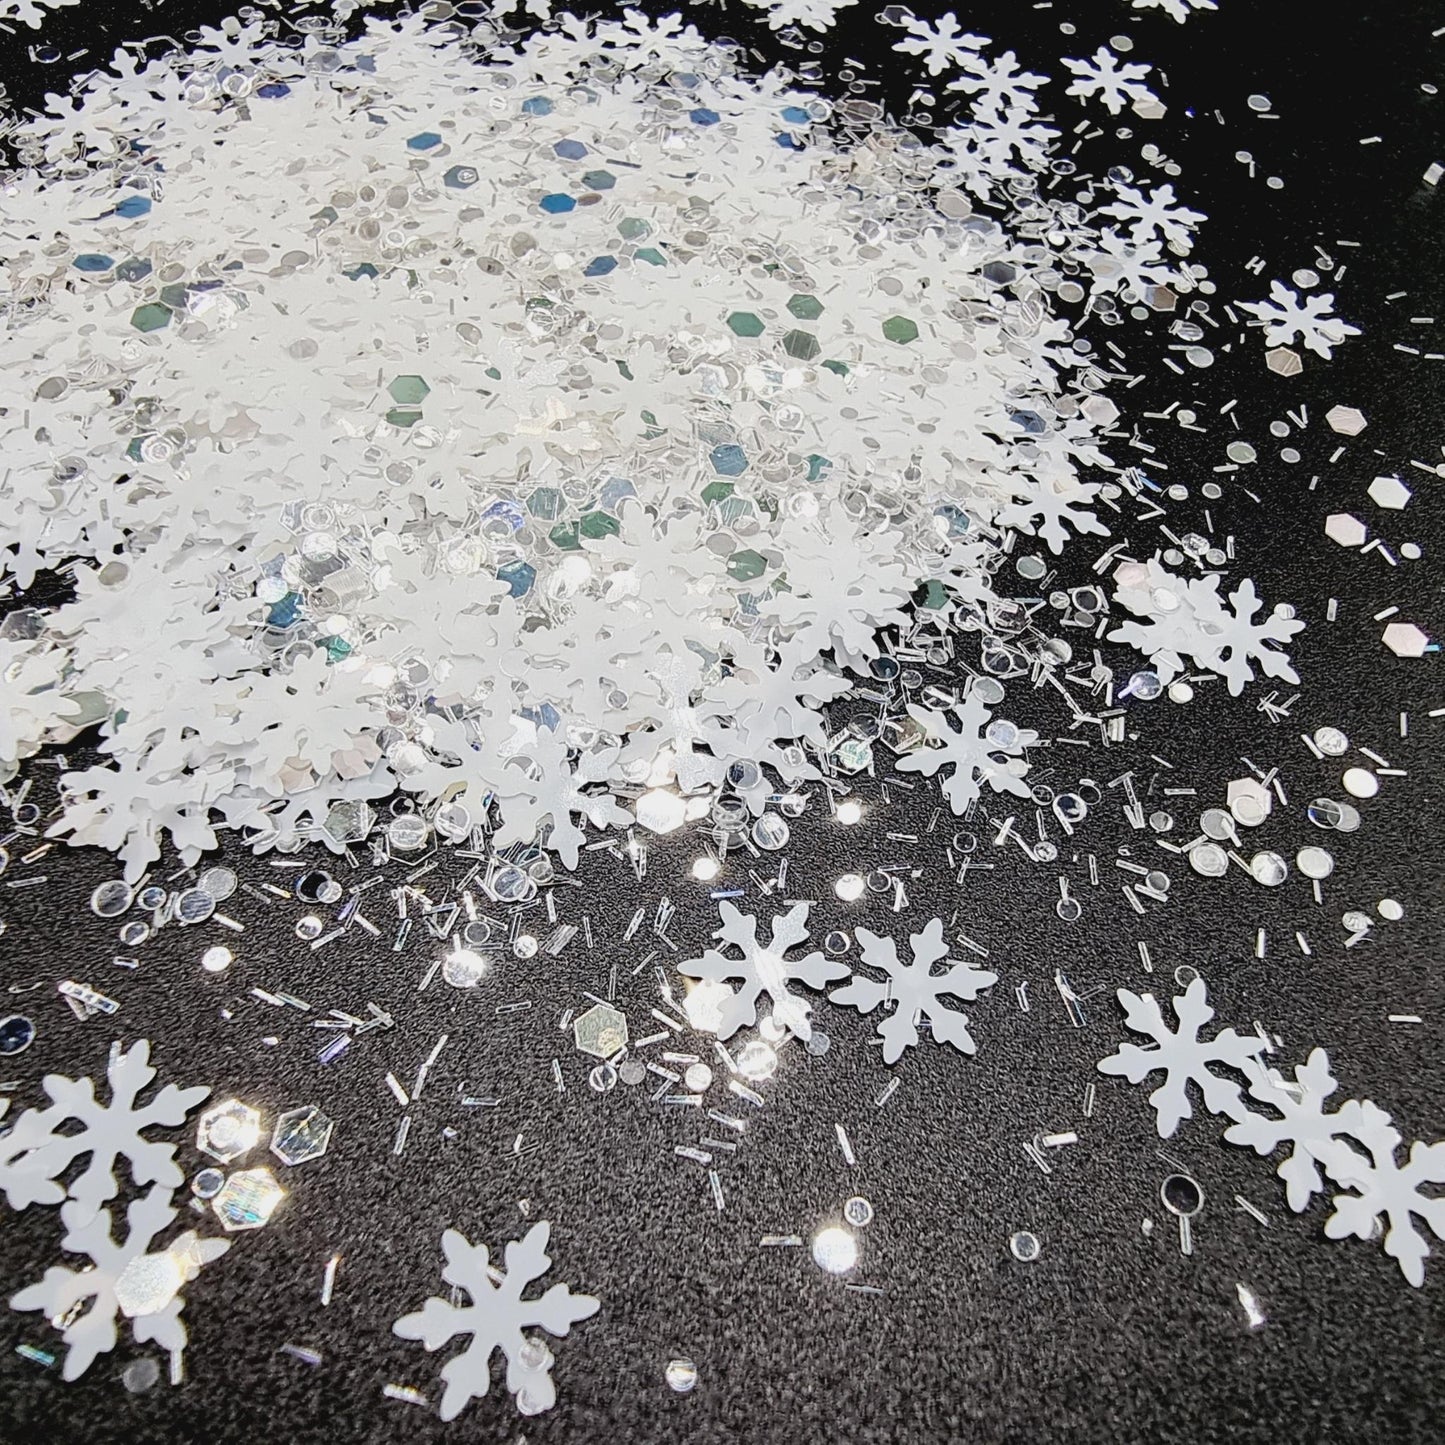 White Christmas is a white and silver mix consisting of white snow flakes, sprinkles, circles and hex shapes.